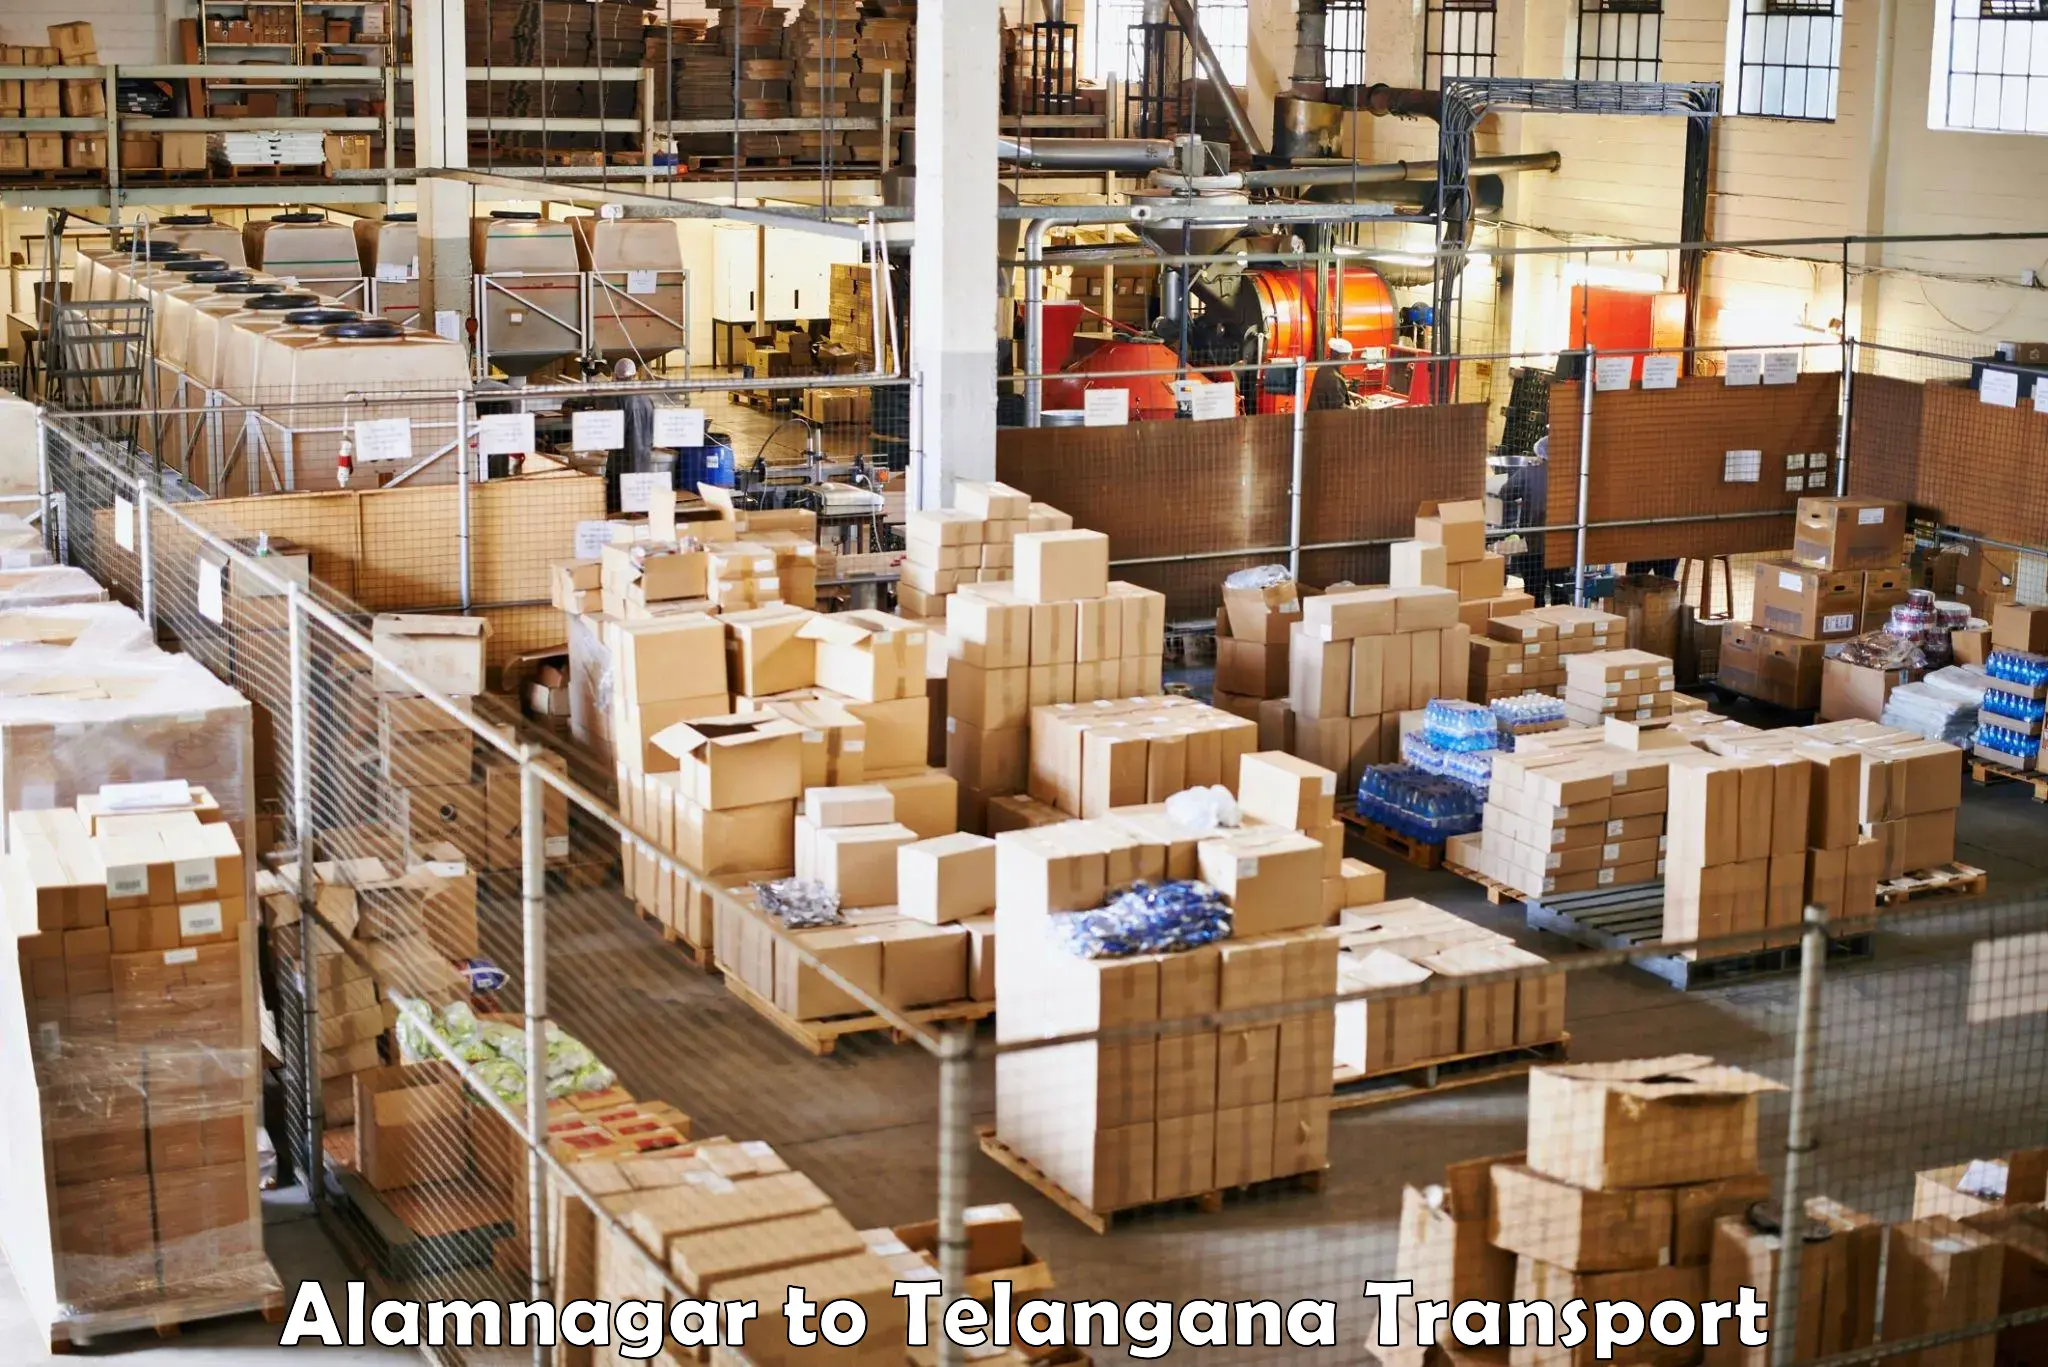 Nearby transport service Alamnagar to Mominpet